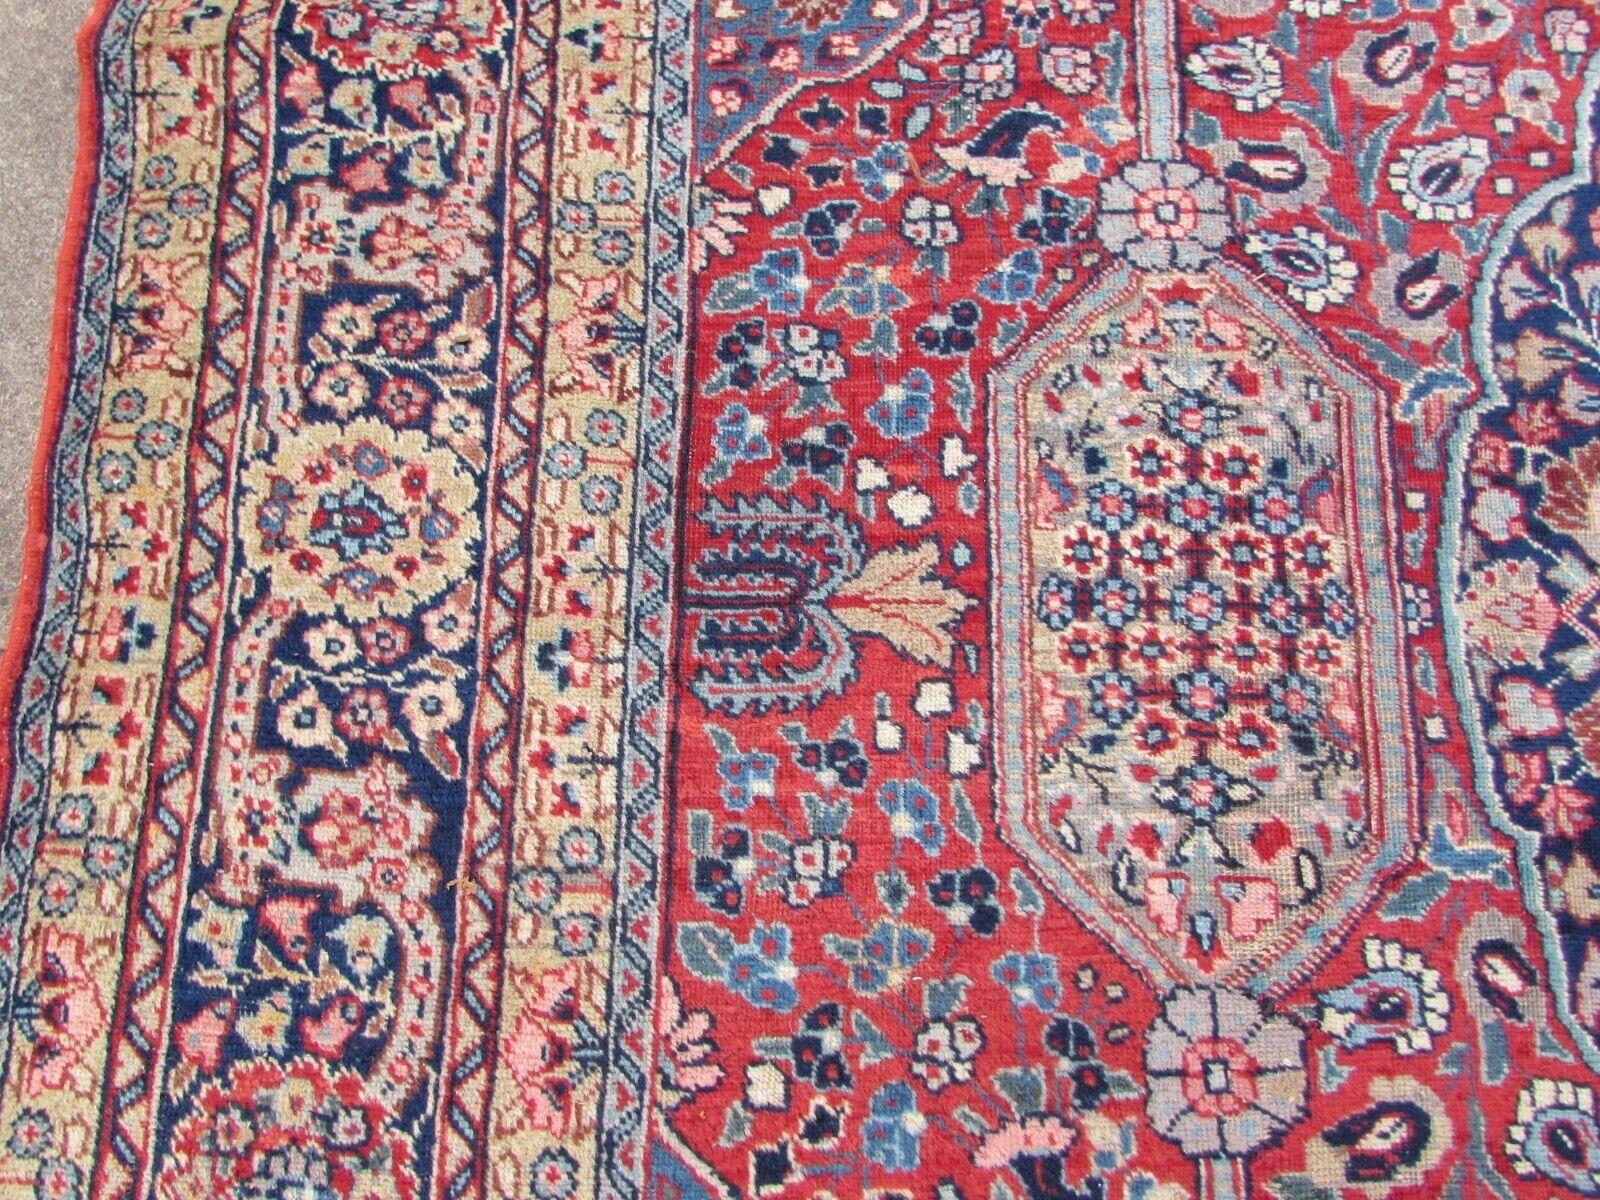 Handmade Vintage Persian Style Kazvin Rug 9.3' x 12.3', 1970s - 1Q68 For Sale 1